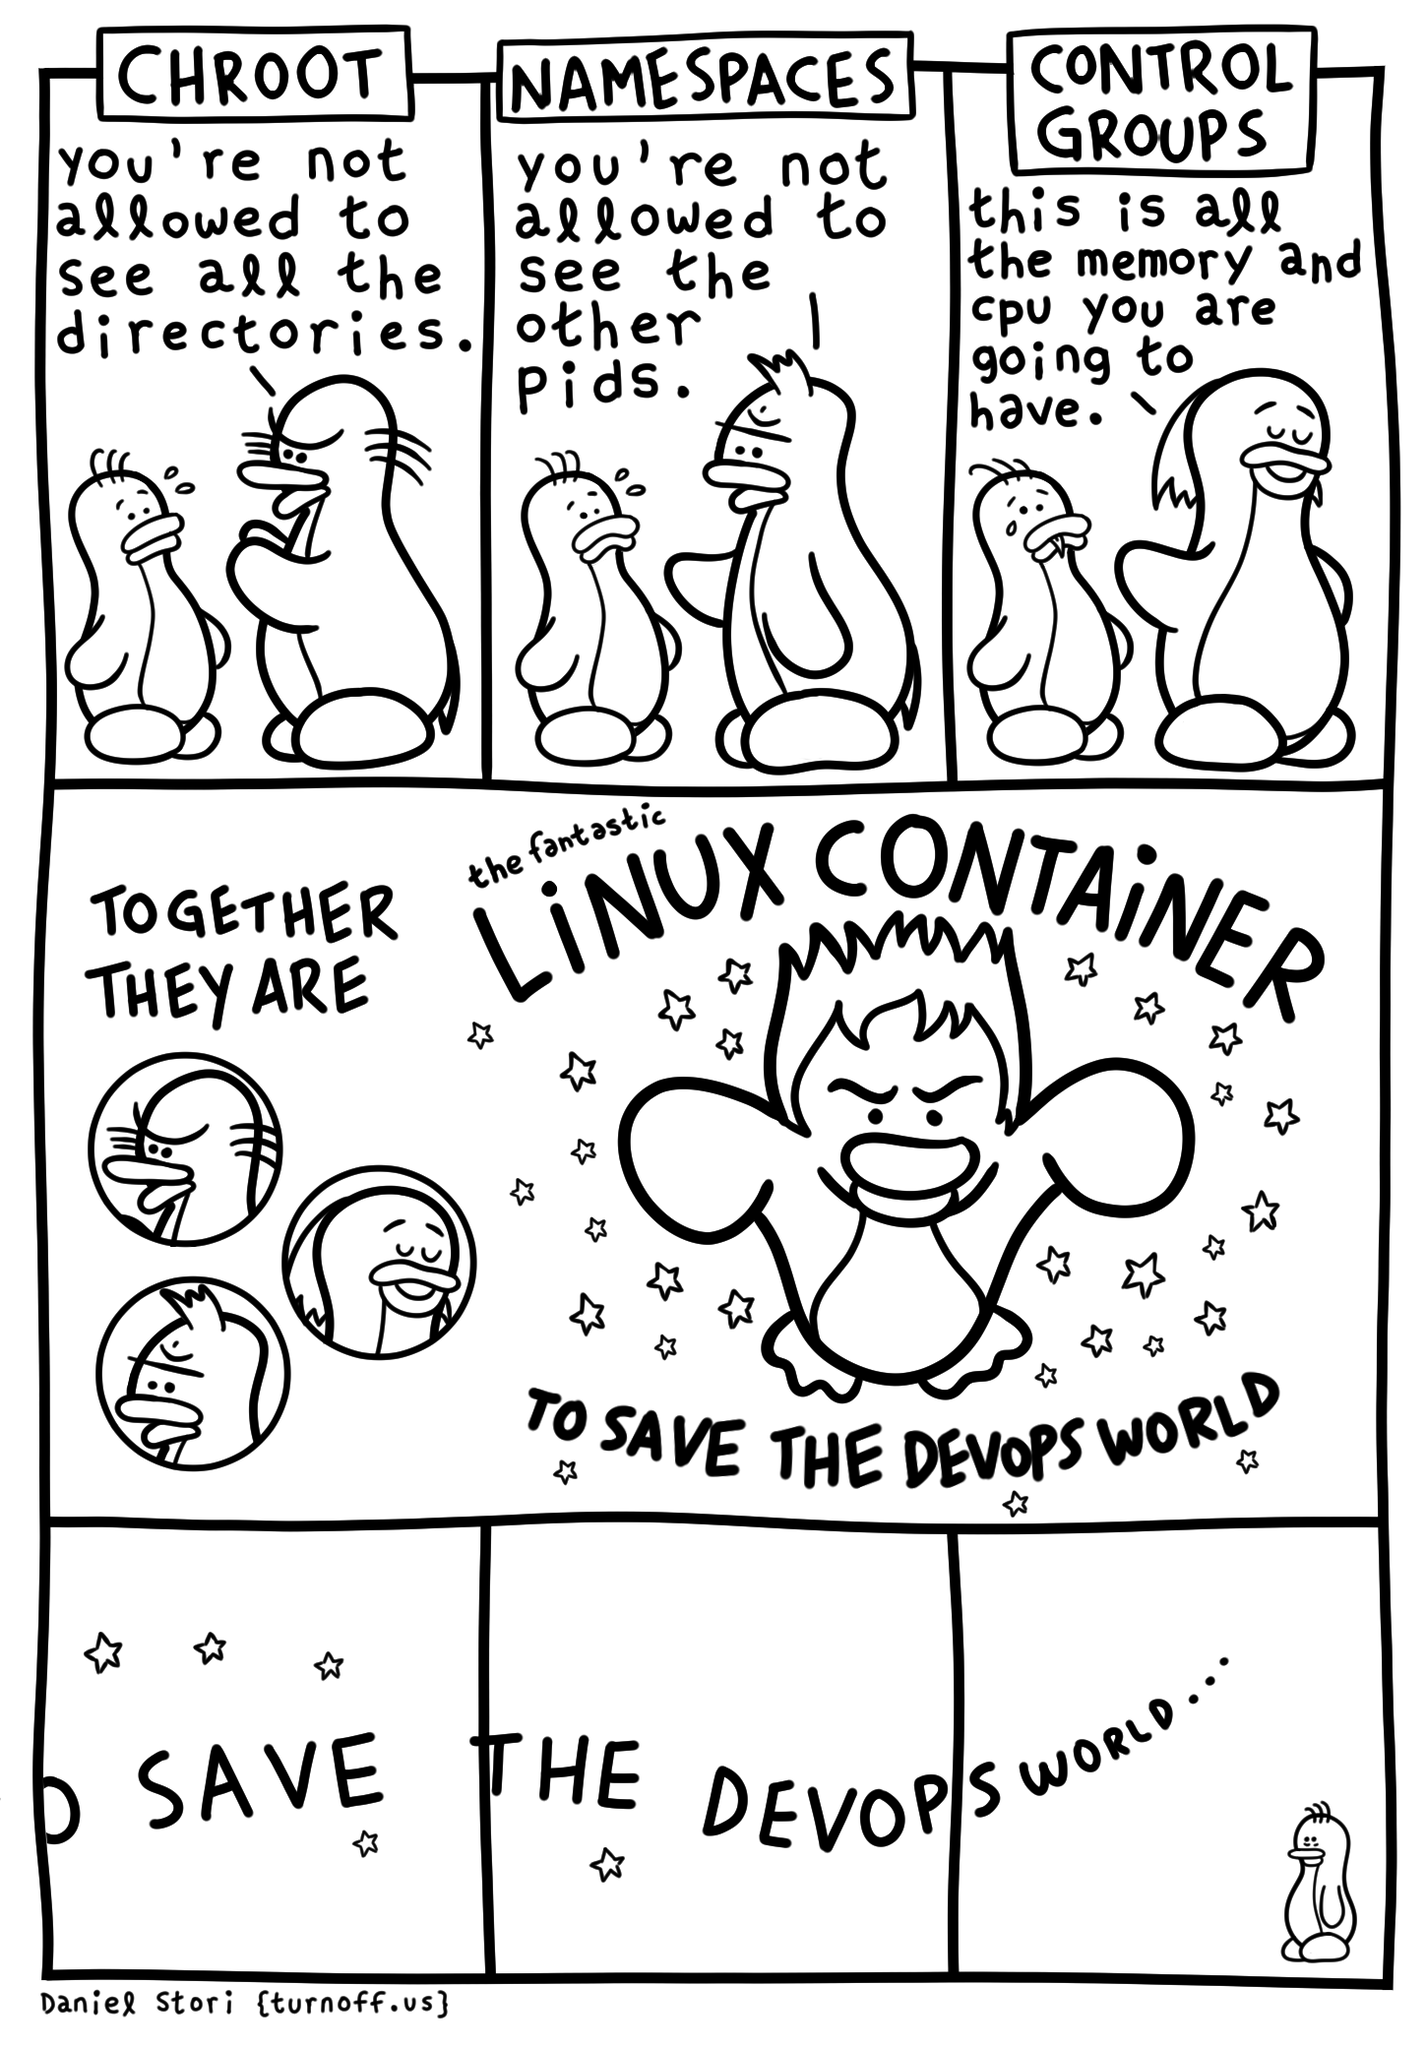 linux_container_to_save_the_devops_world.png